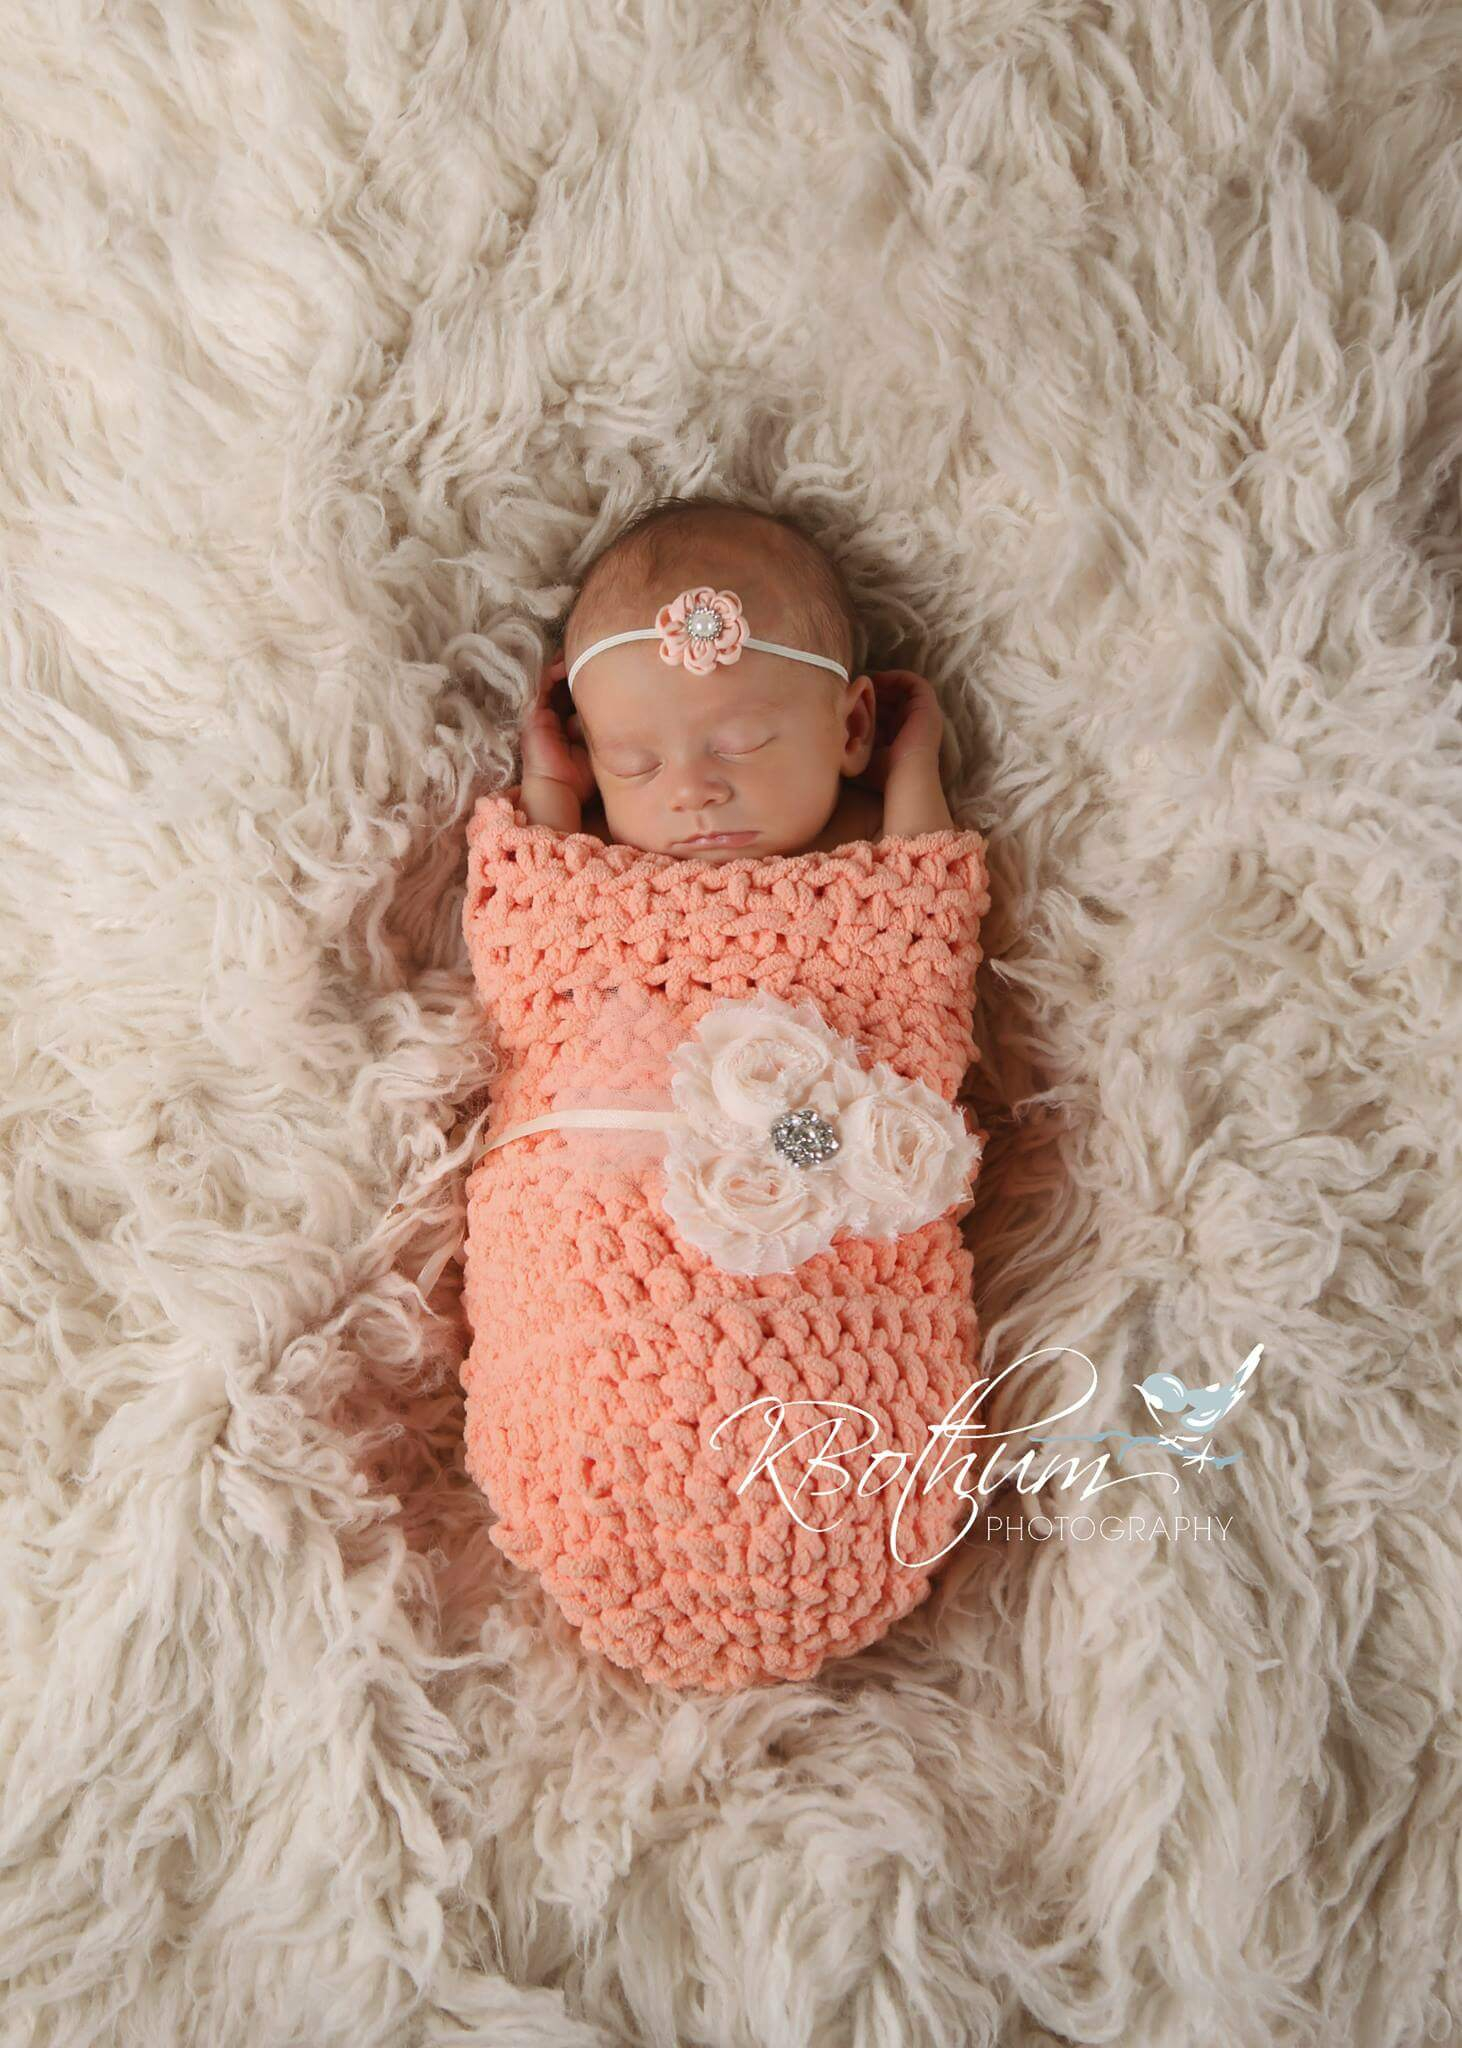 Crochet Patterns For Baby How To Crochet A Ba Cocoon That Will Make A Perfect Ba Gift